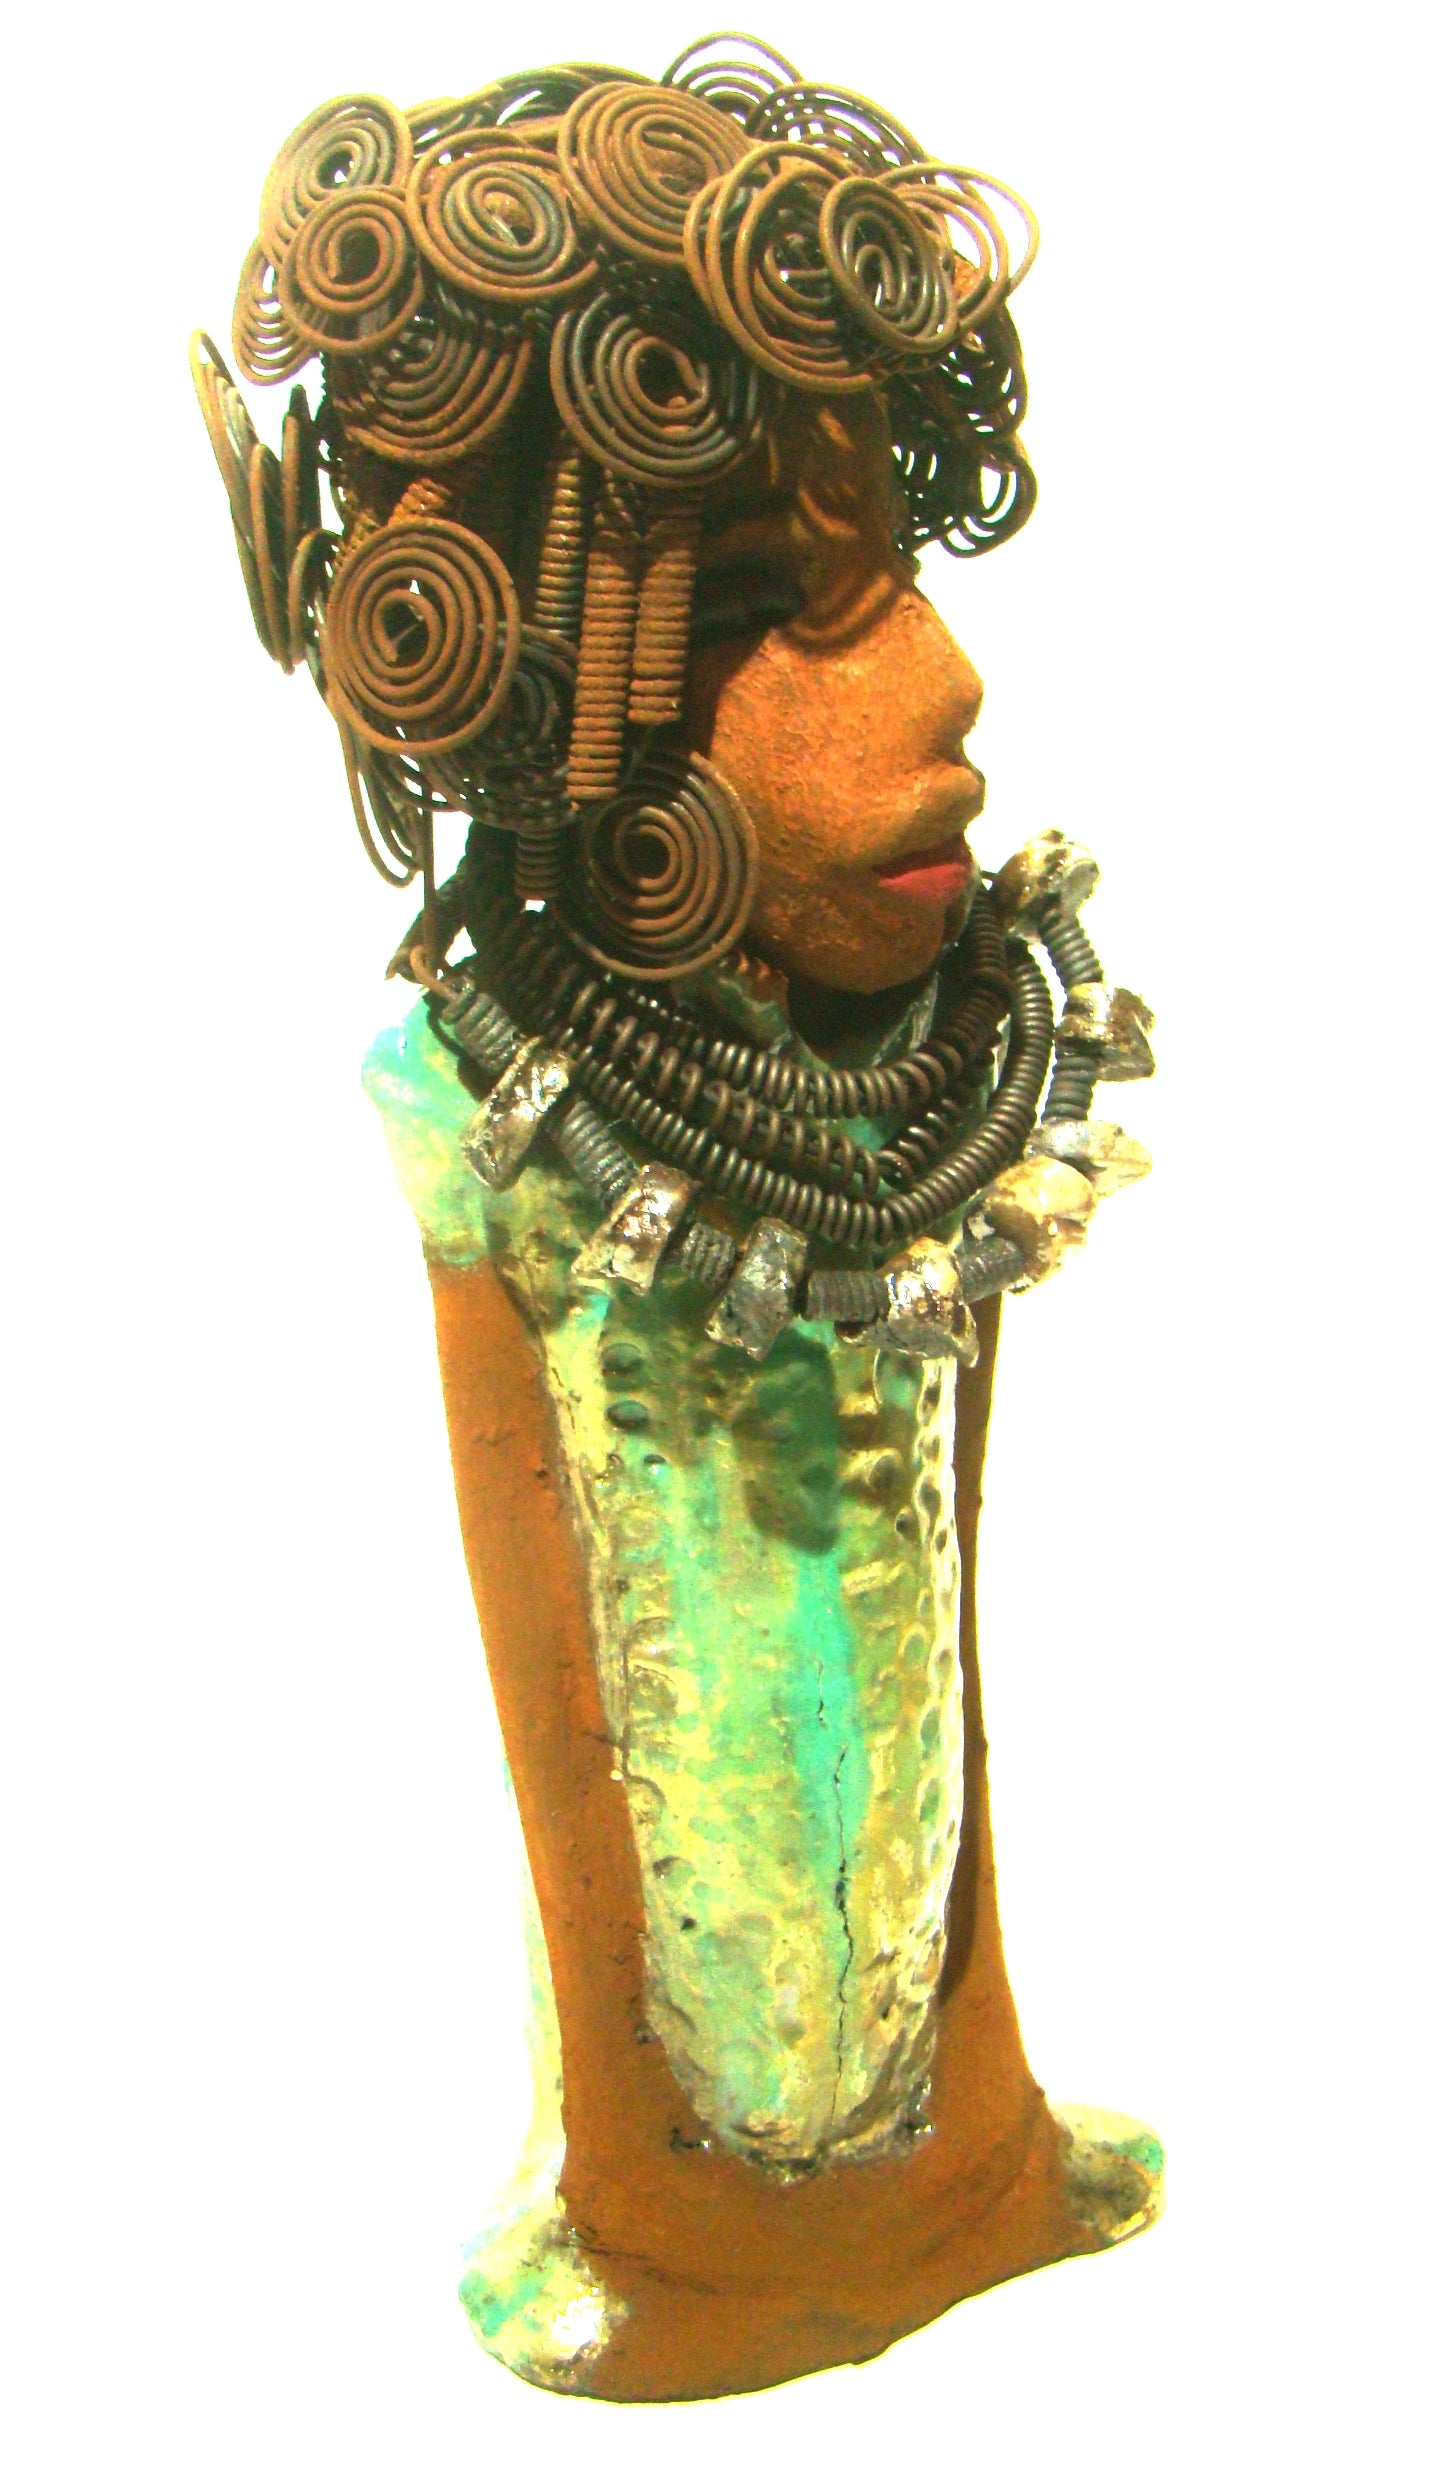 Martina stands 13" x 5" x 4" and weighs 3.15 lb. She wears a large beaded coiled collared necklace. Martina wears a metallic green gold textured dress. Martina has an awesome honey brown complexion that compliments her subdued look. She has those familiar long loving arms! Martina is looking for a new home. She is a conversation piece. Free Shipping!